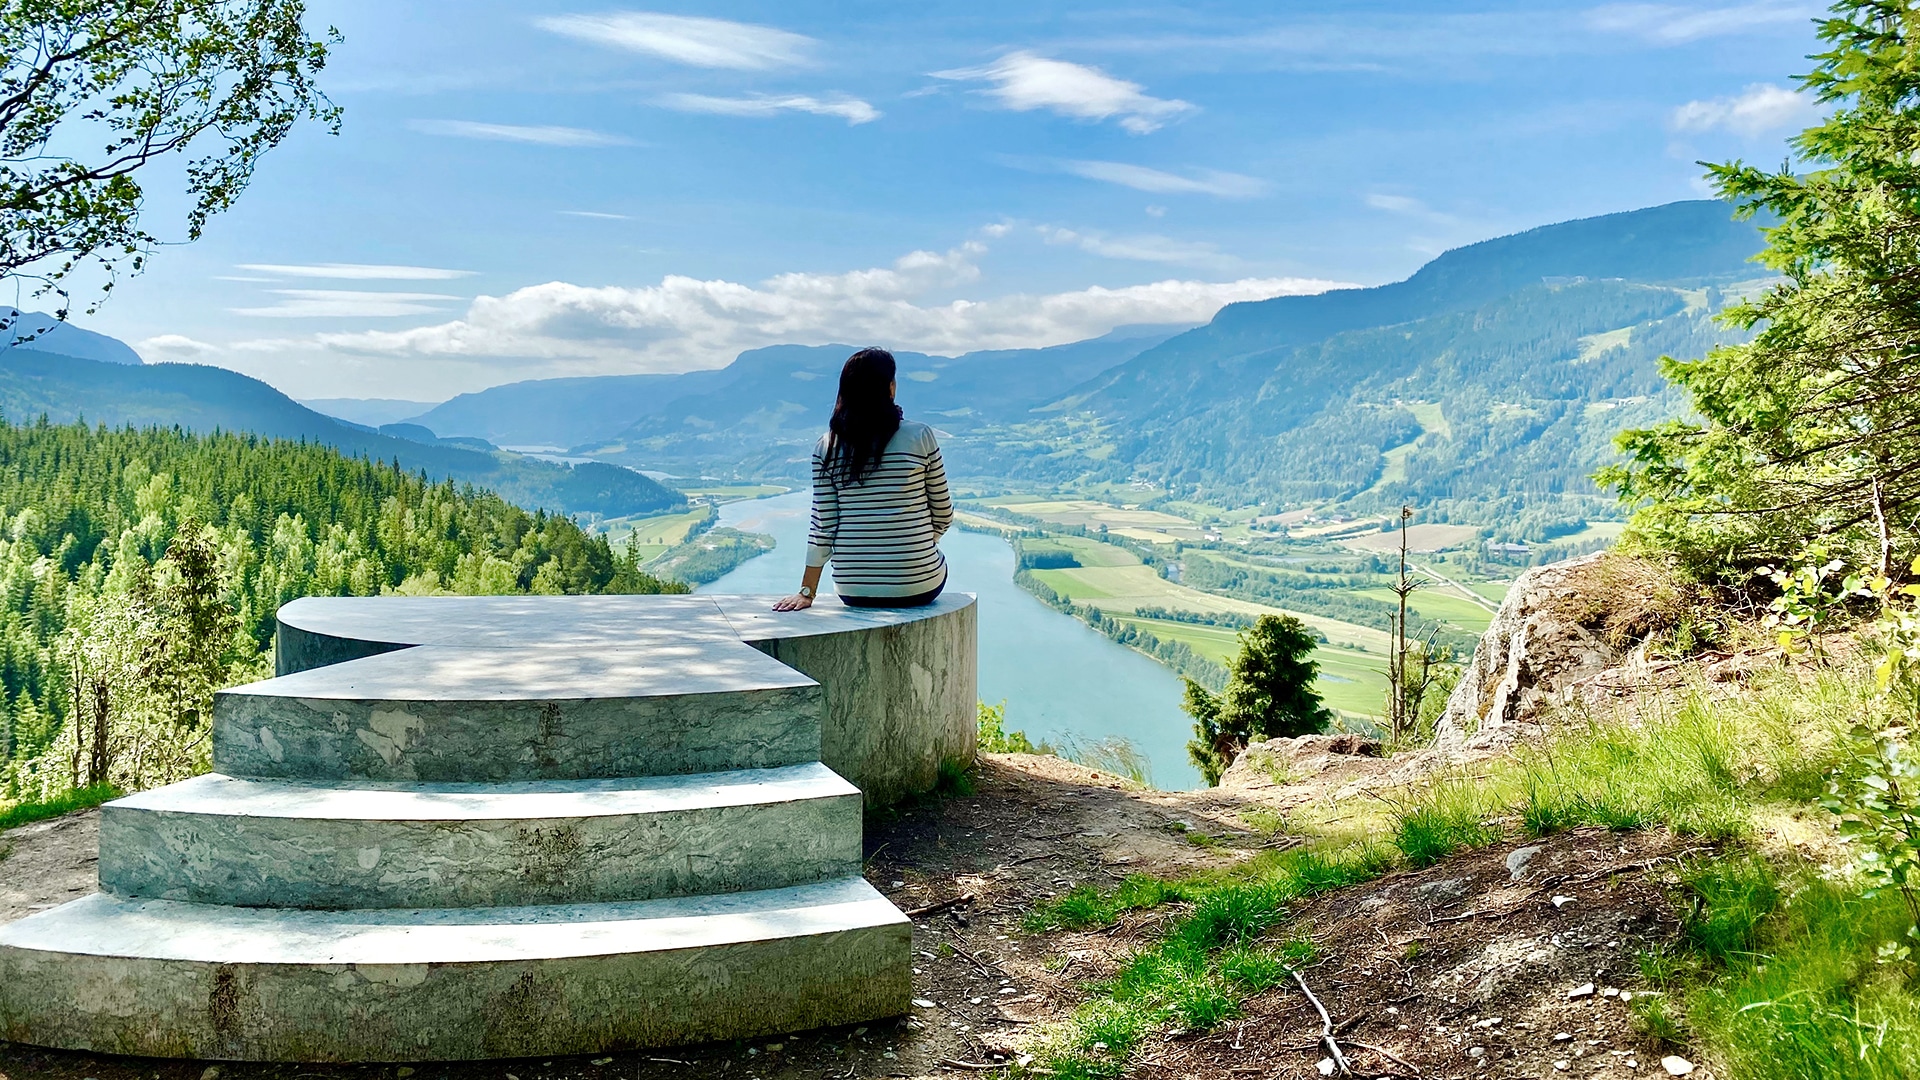 A woman enjoying the view of Gudbrandsdalen on a sunny summer day with mountains in the distance.